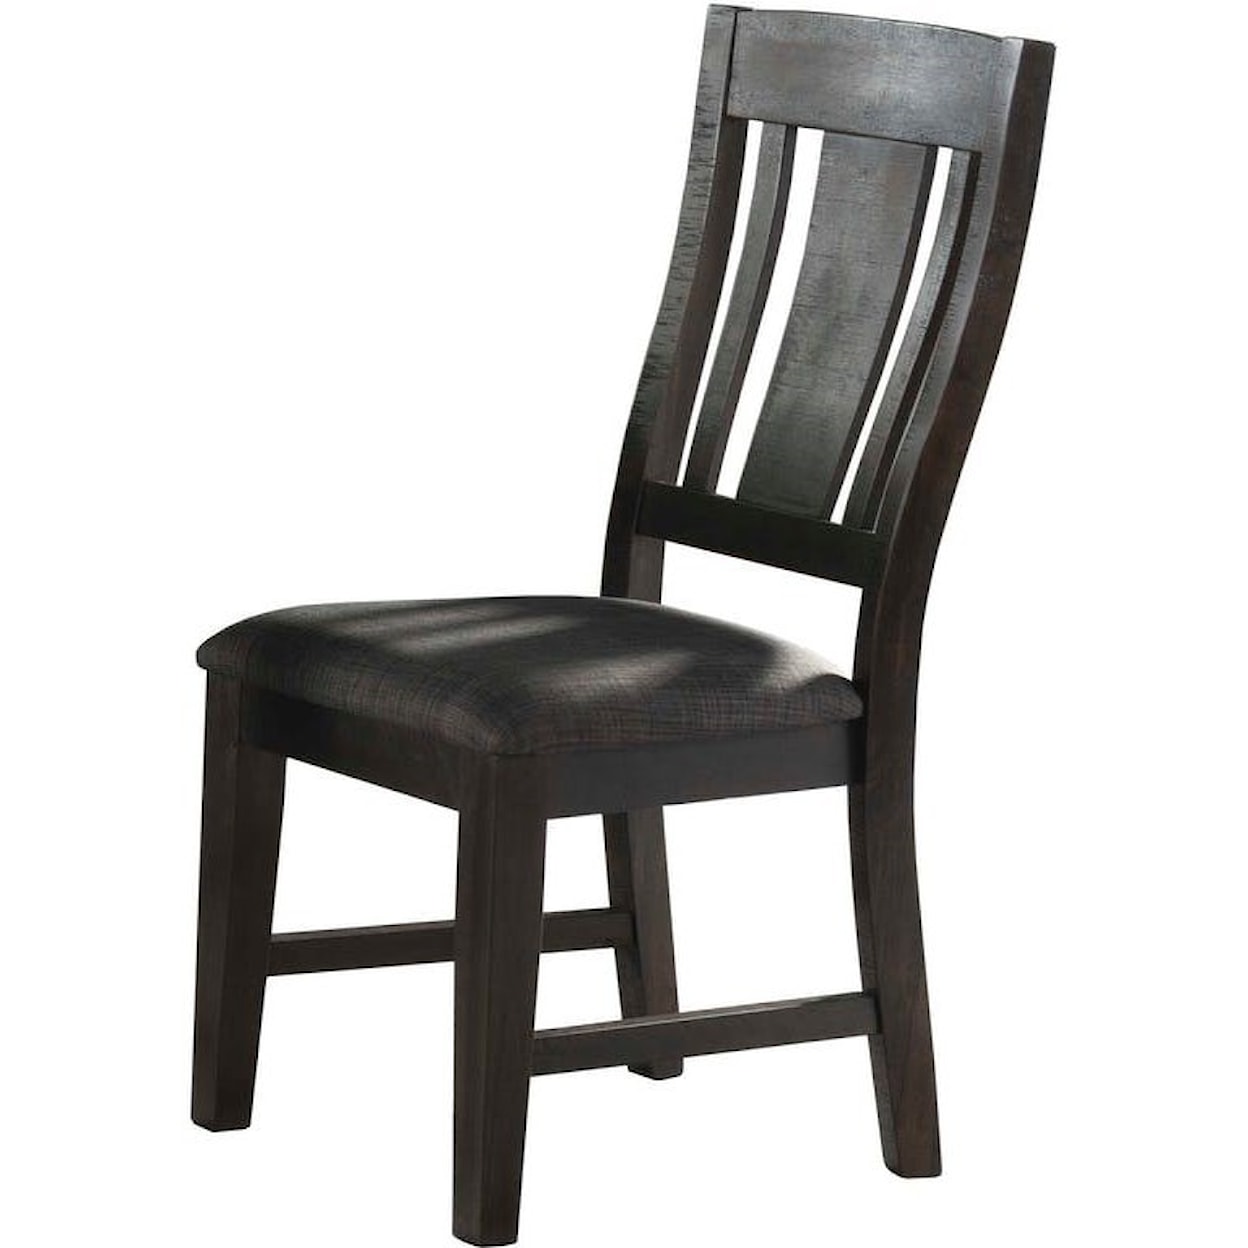 Elements International Cash Dining Side Chair